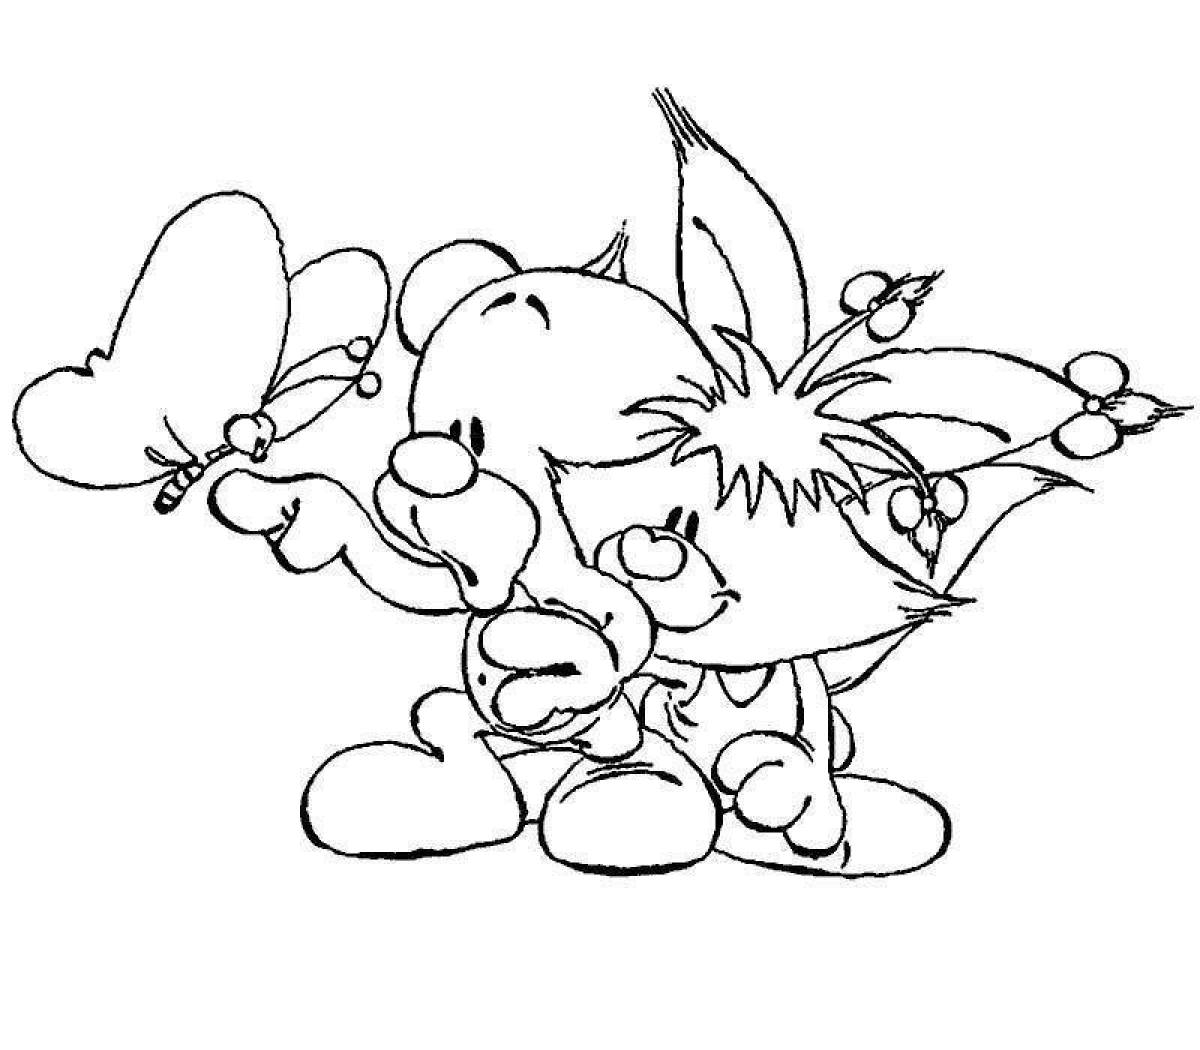 Fun hobby line coloring page